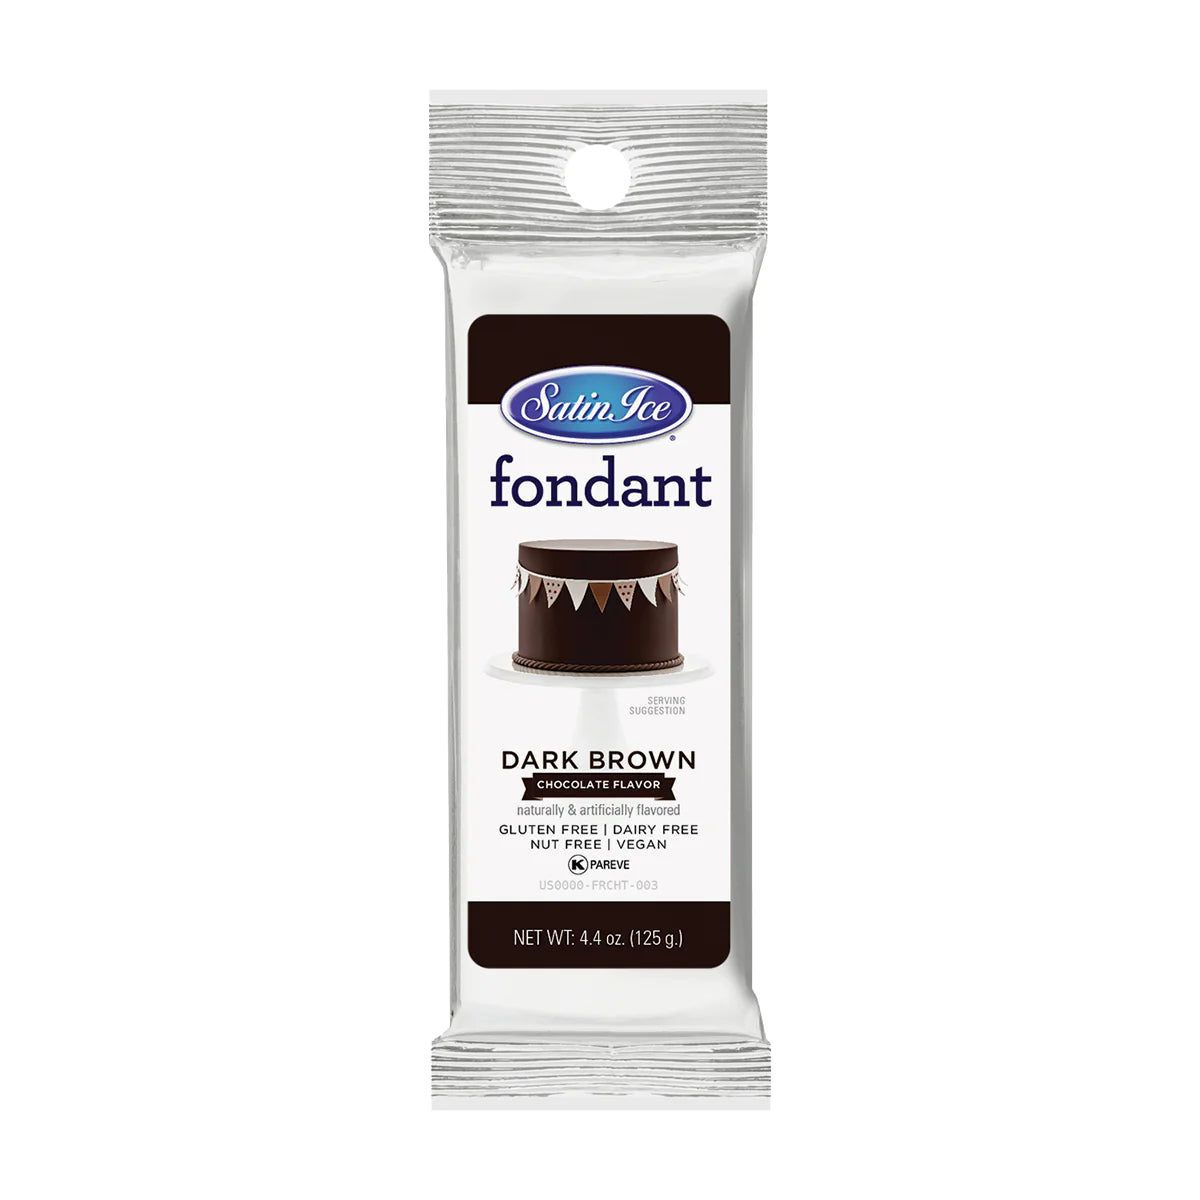 Dark Brown Colored and Vanilla Flavored Fondant in a 4.4 Ounce Foil Pouch